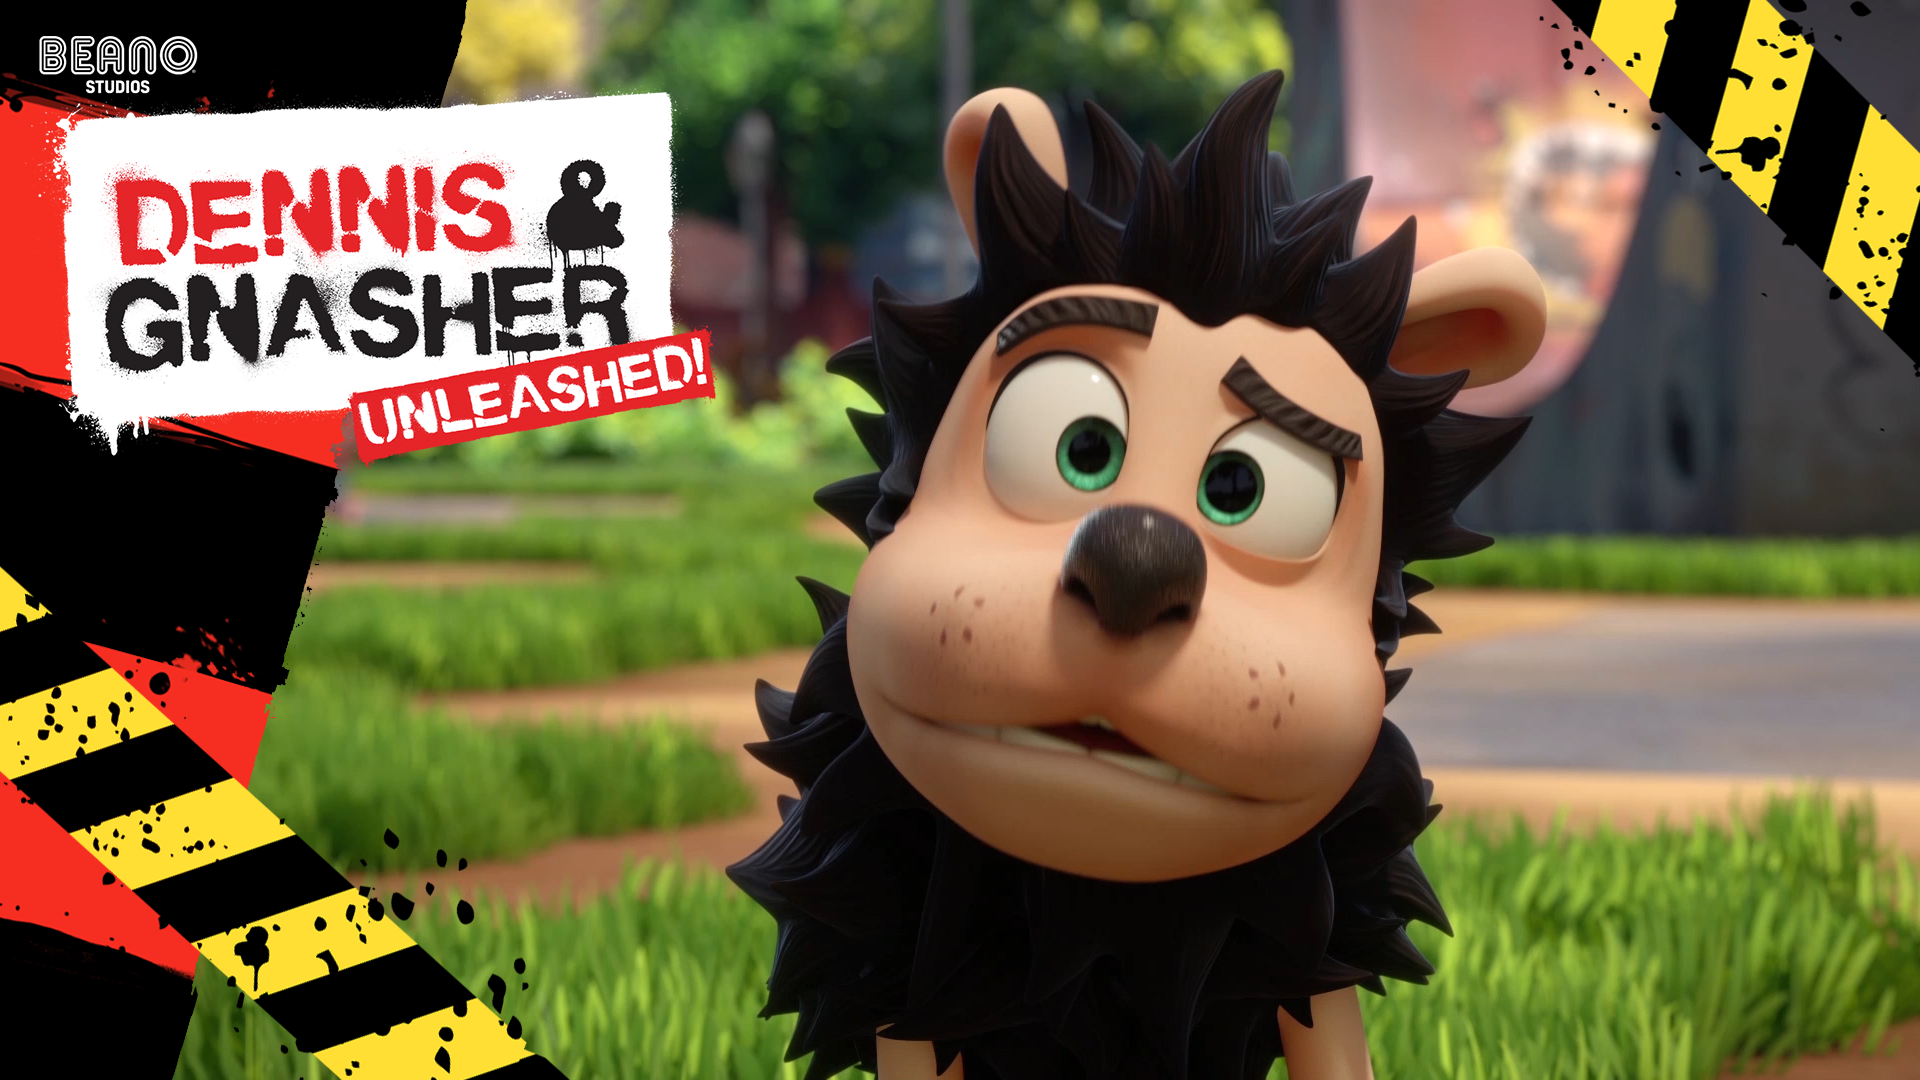 Dennis & Gnasher Unleashed! Series 2 - Episode 39: The Hairy Wiggler